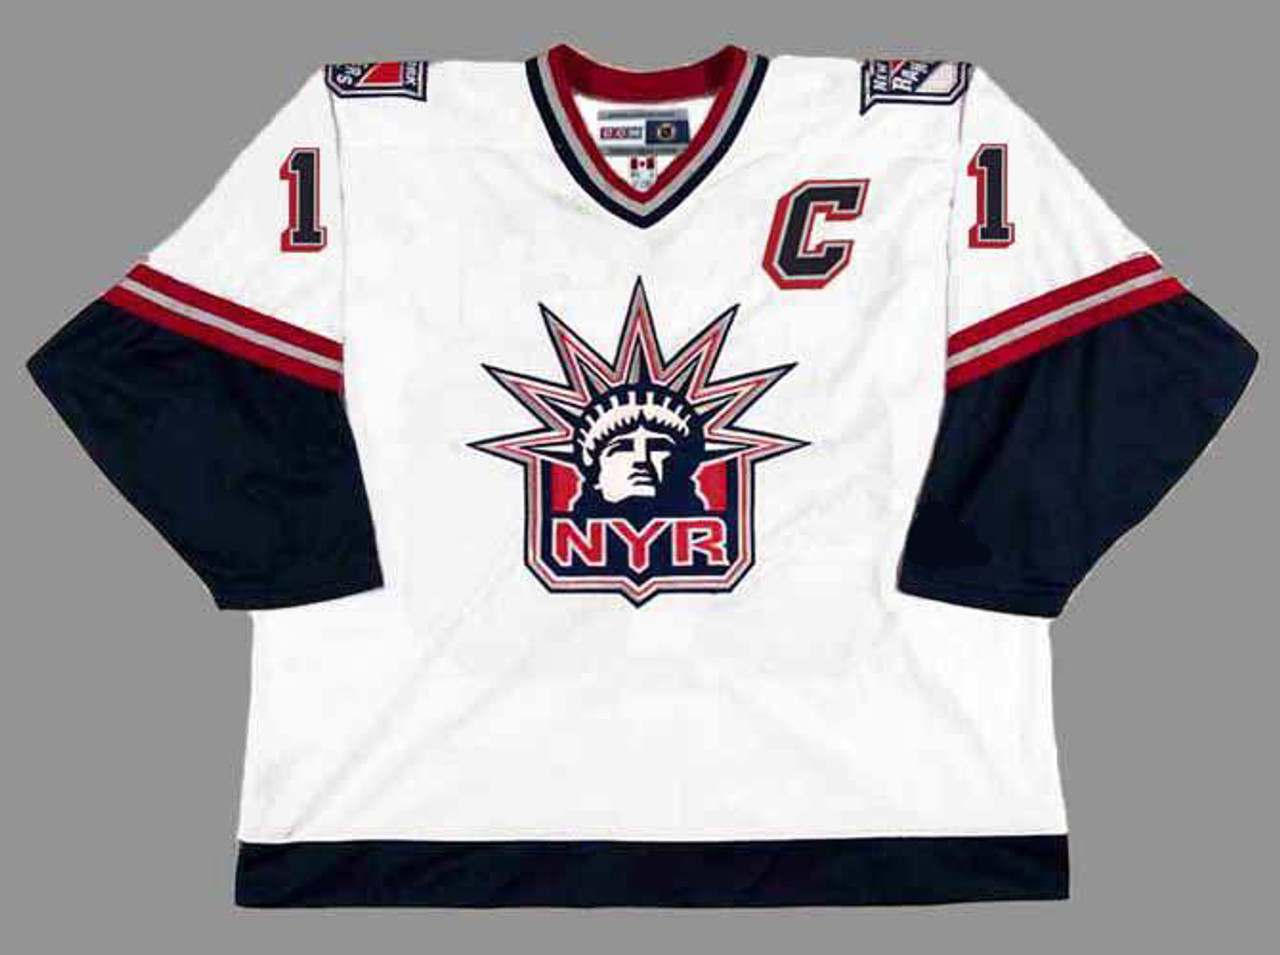 BCBS For 11/18: The New York Rangers Choose Liberty Over Death; “Reverse  Retro” Liberty Head Jerseys Revealed, Detective Fans, “Hockeytown,  Indonesia”, Happy 94th Birthday To NYR, Conn Smythe's Gambling & The  Creation